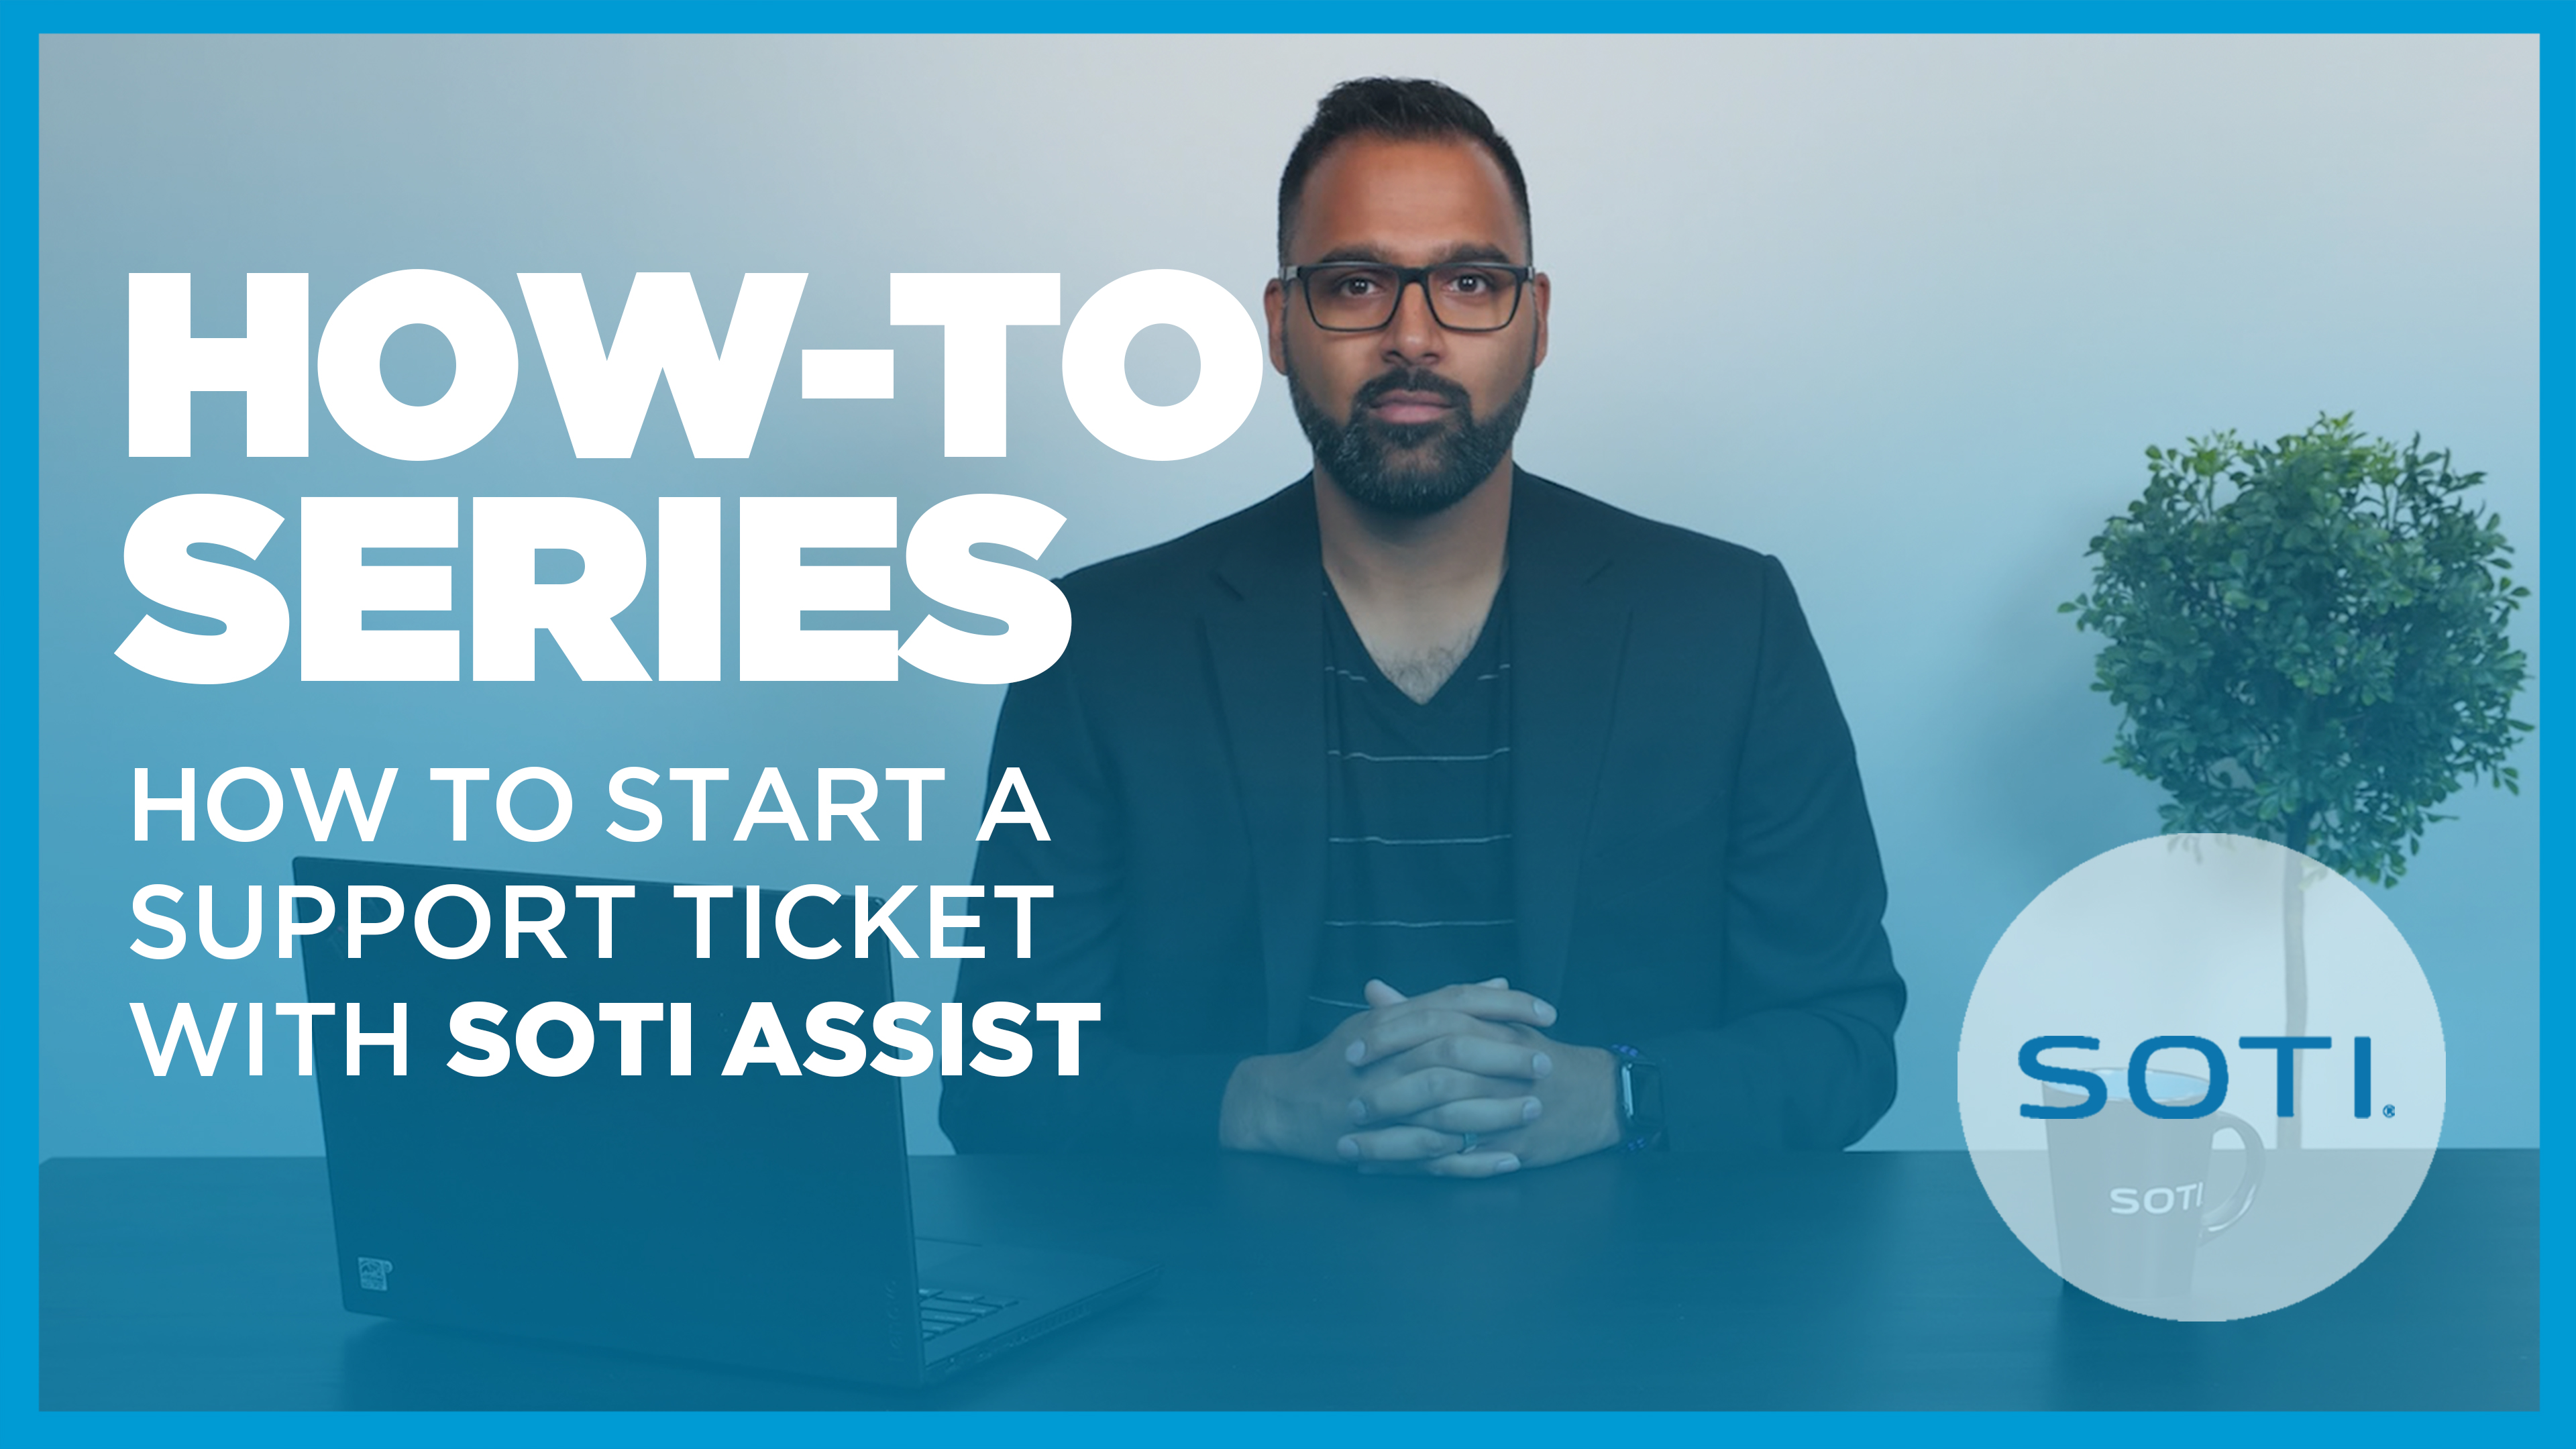 How-To: Start a Support Ticket with SOTI Assist